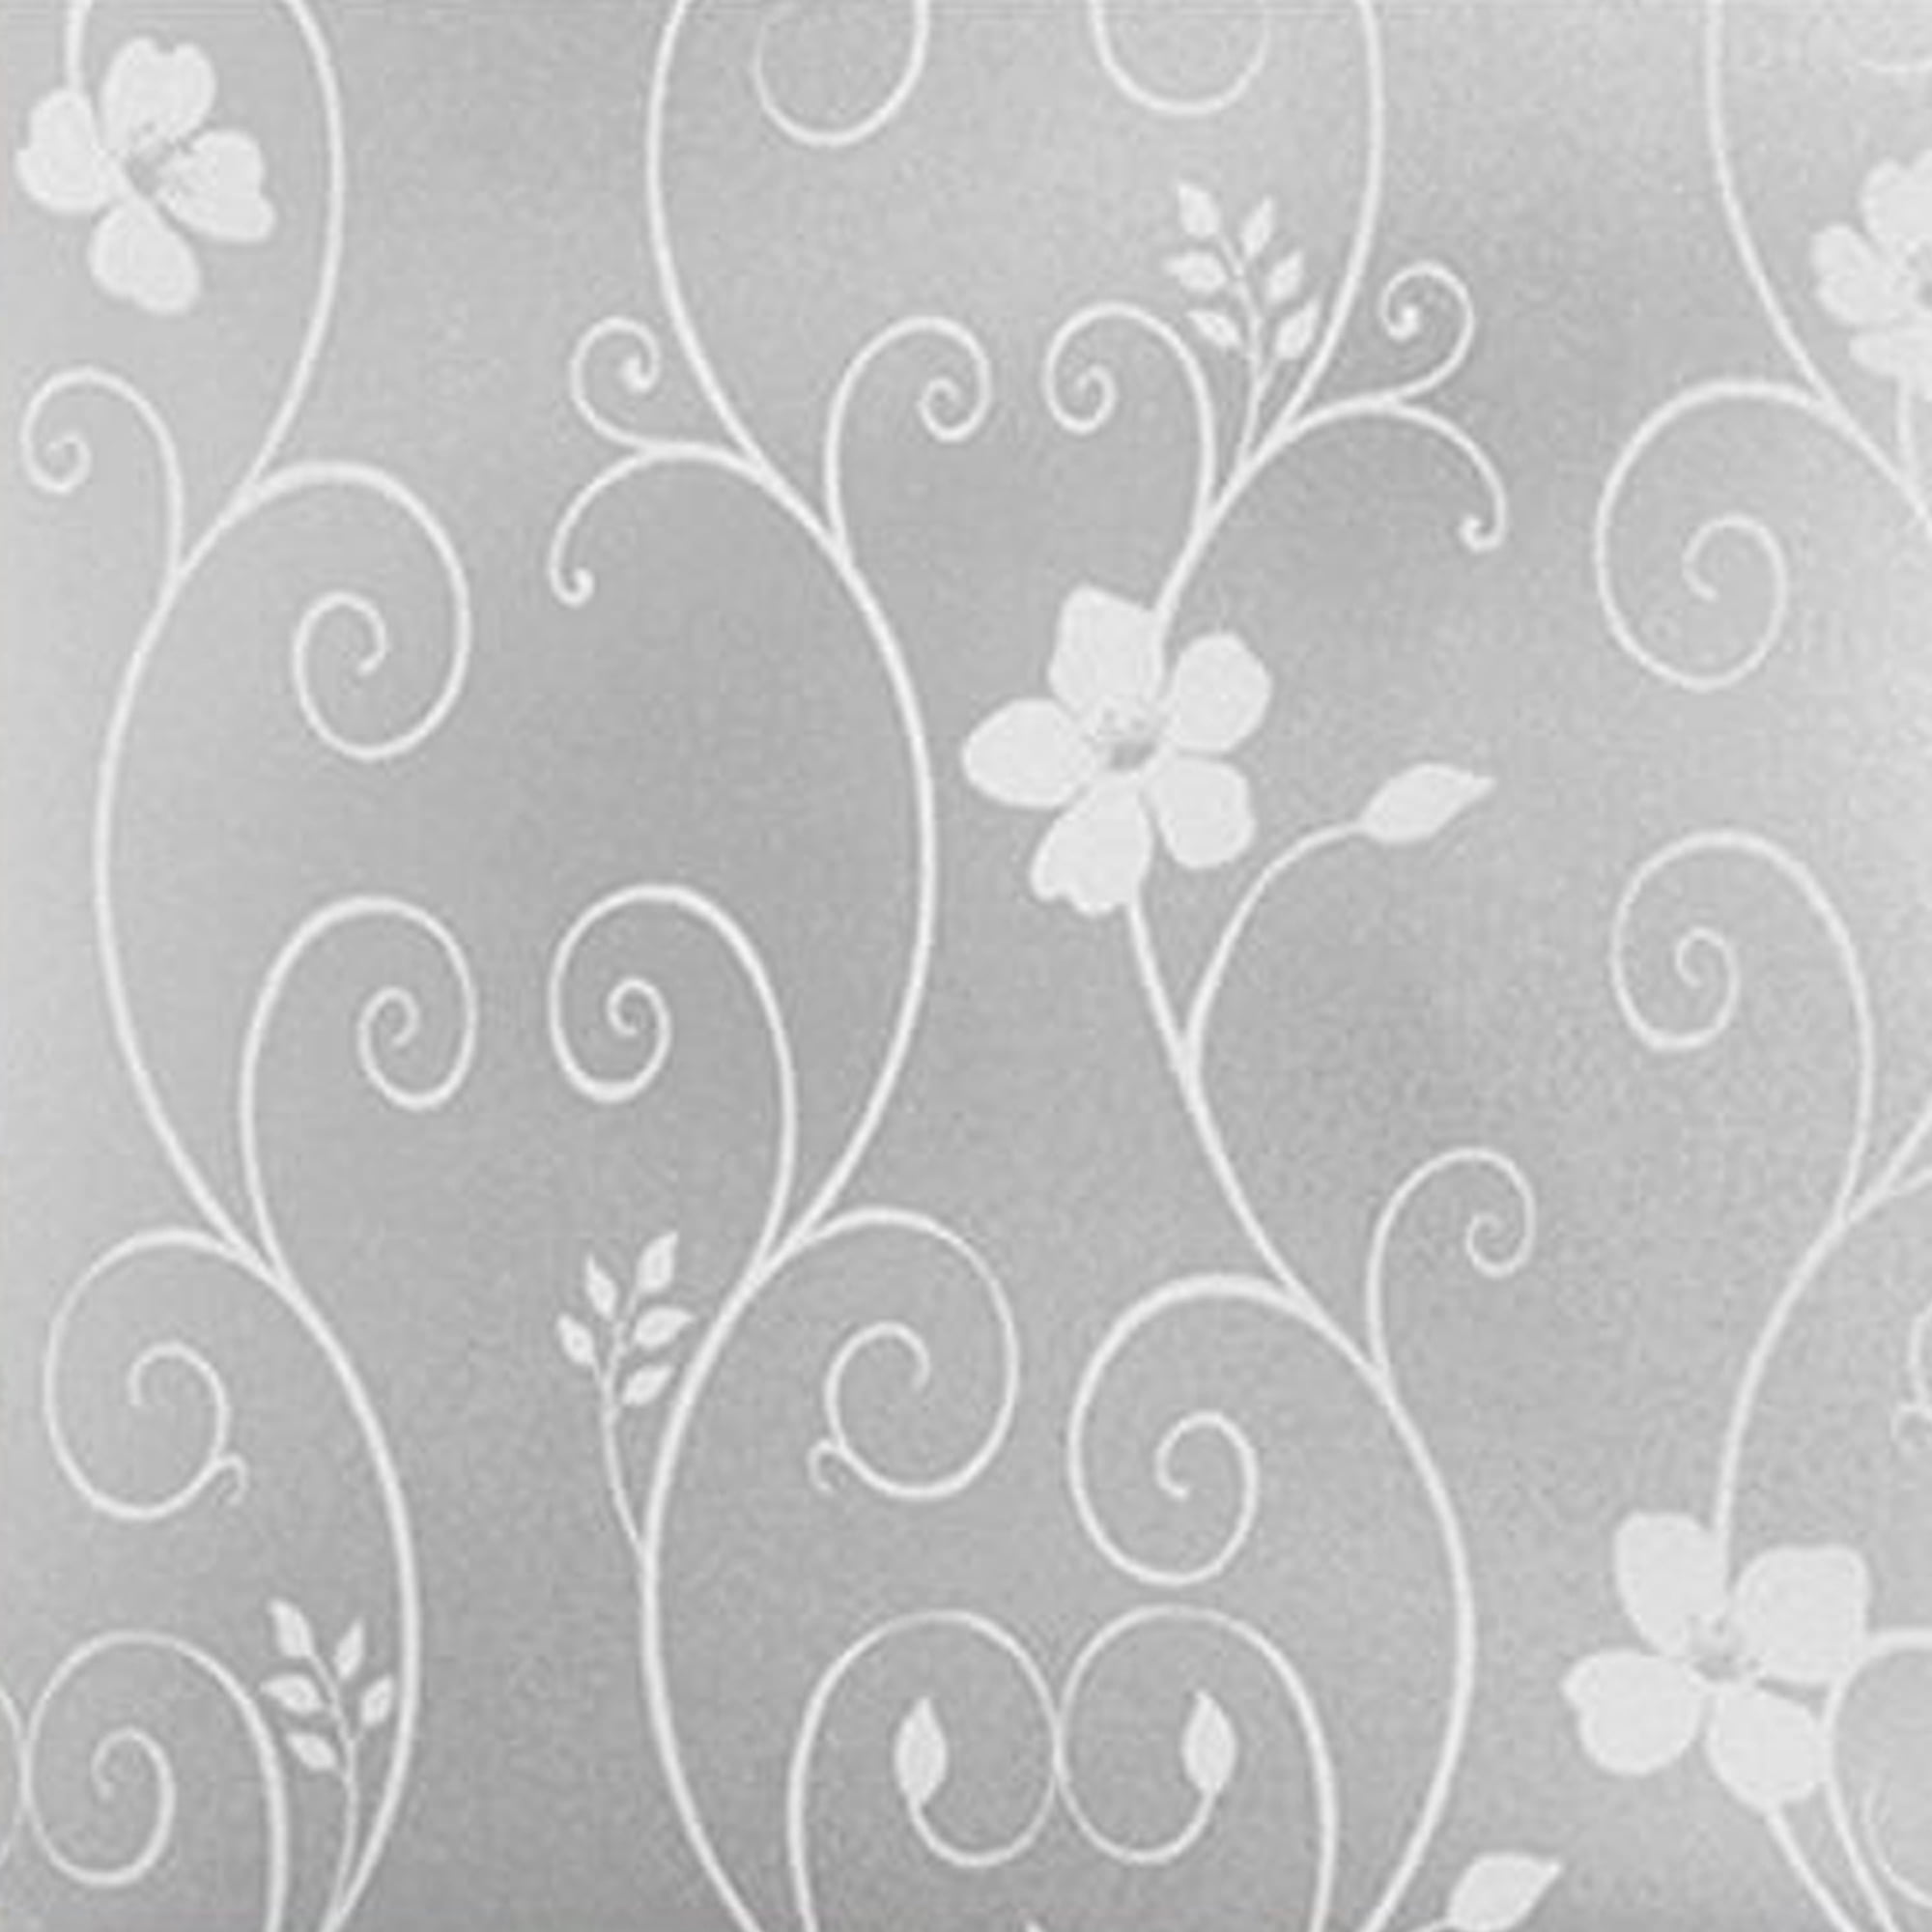 Film Frosted Decor Home Iron Privacy Wrought Flower Black&white Glass Stickers 